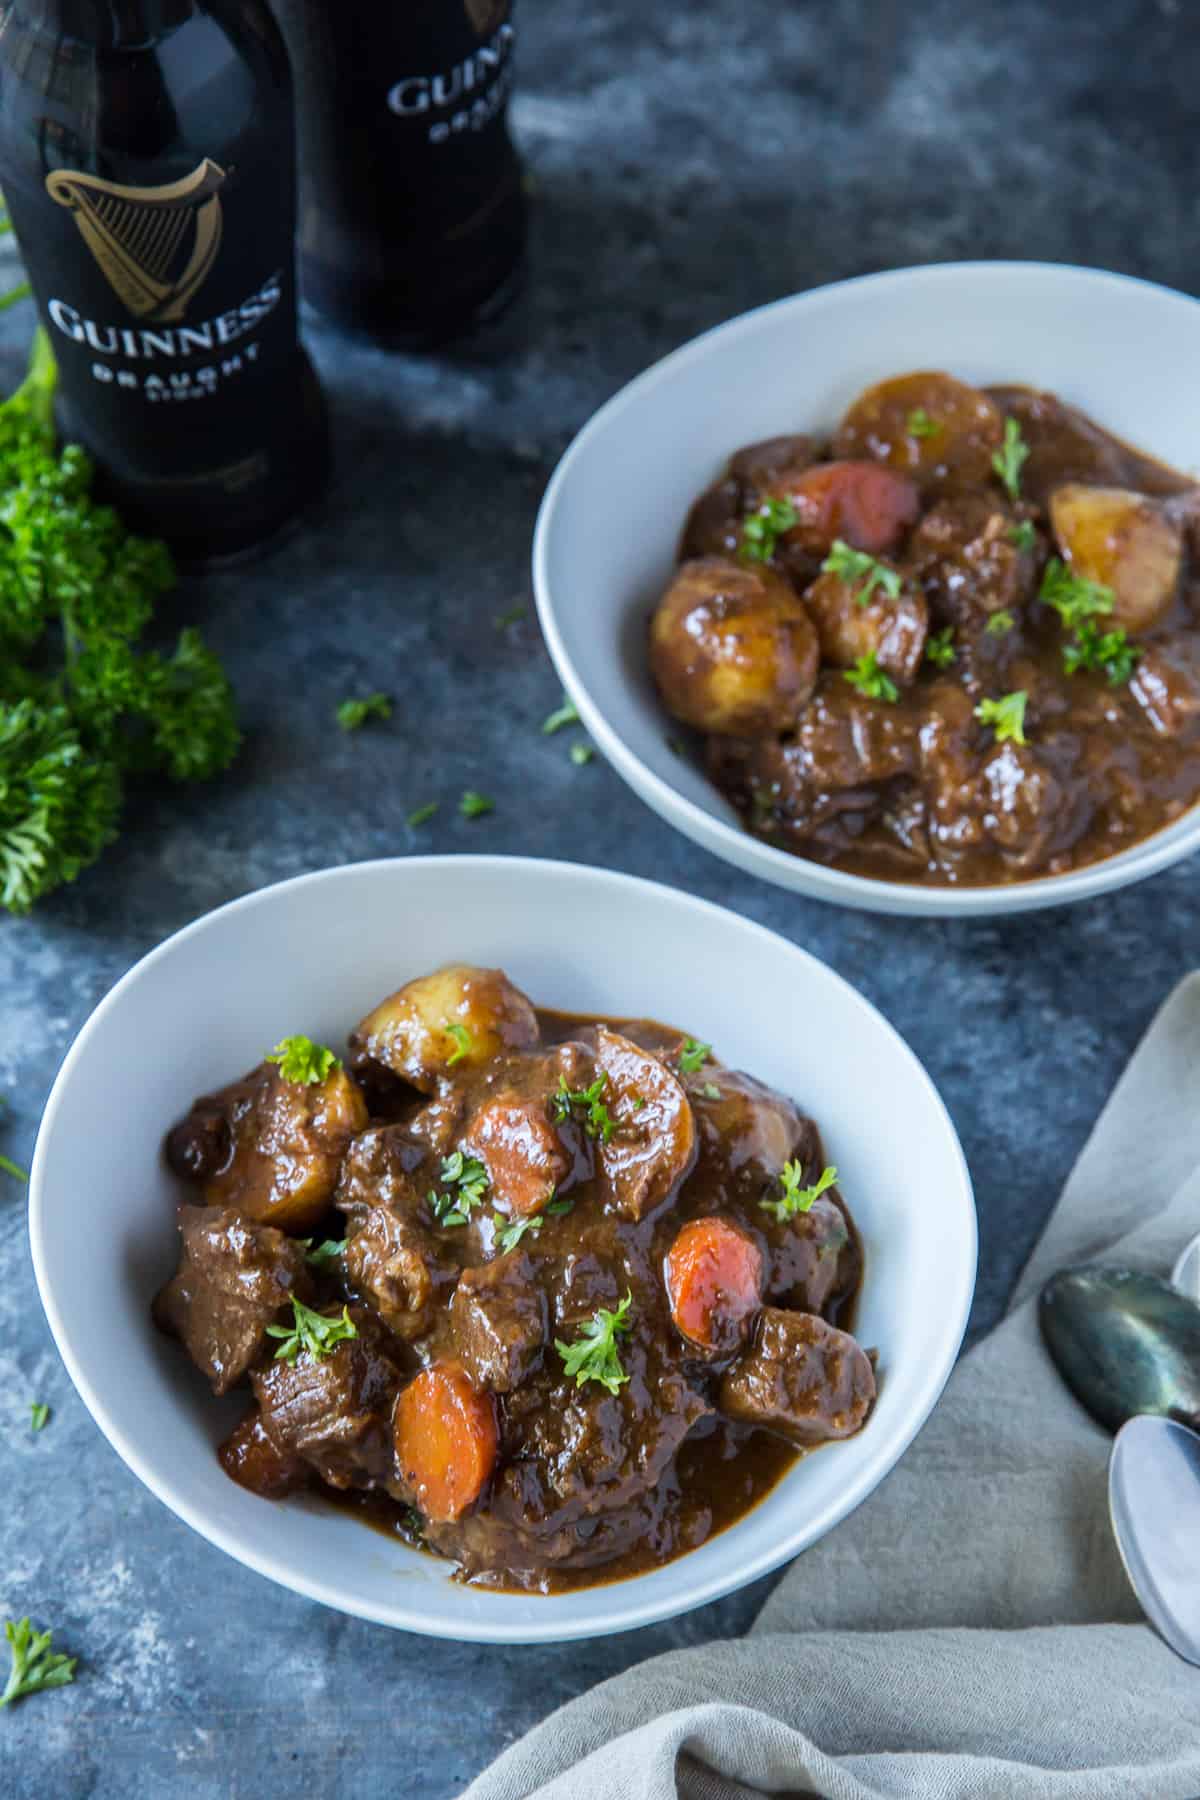 Two bowls of Irish beef stew next to two bottles of Guinness beer.